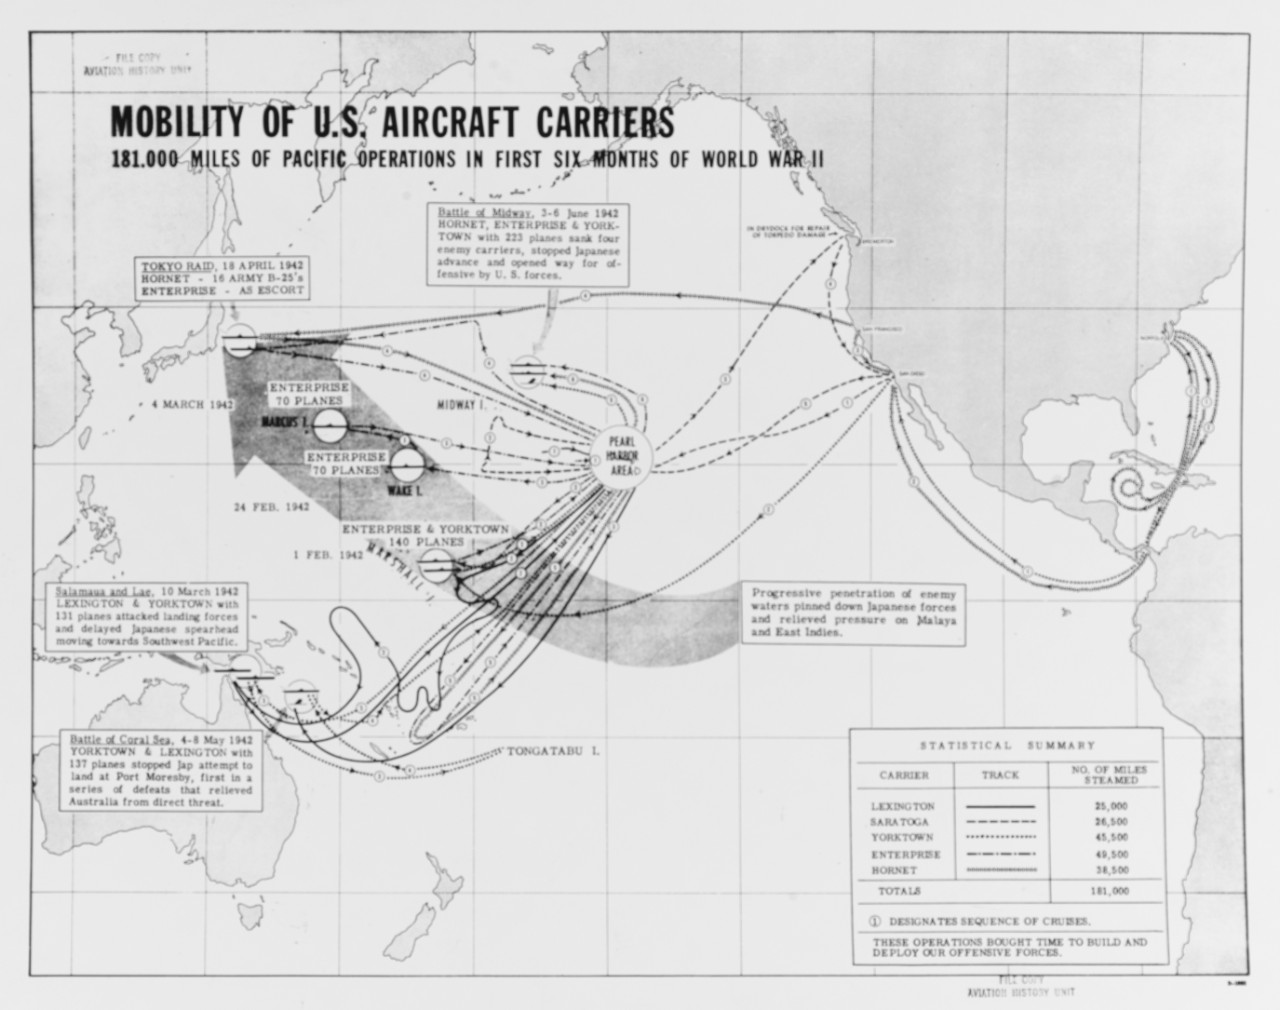 Mobility of U.S. Aircraft Carriers